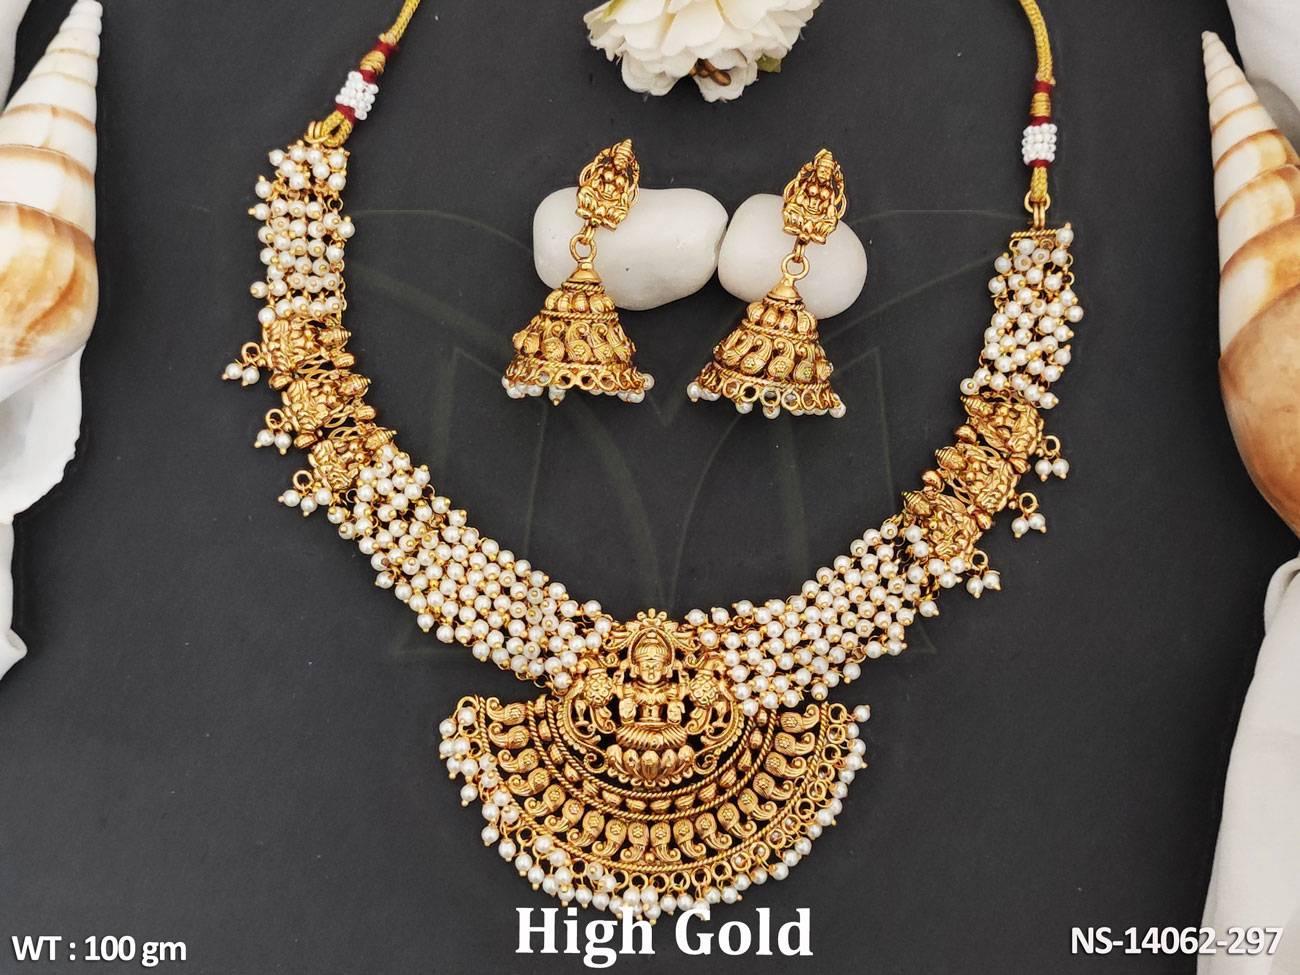 Designer necklace set features a Laxmi pendant with clustered pearls and high-quality gold polish for a luxurious look.